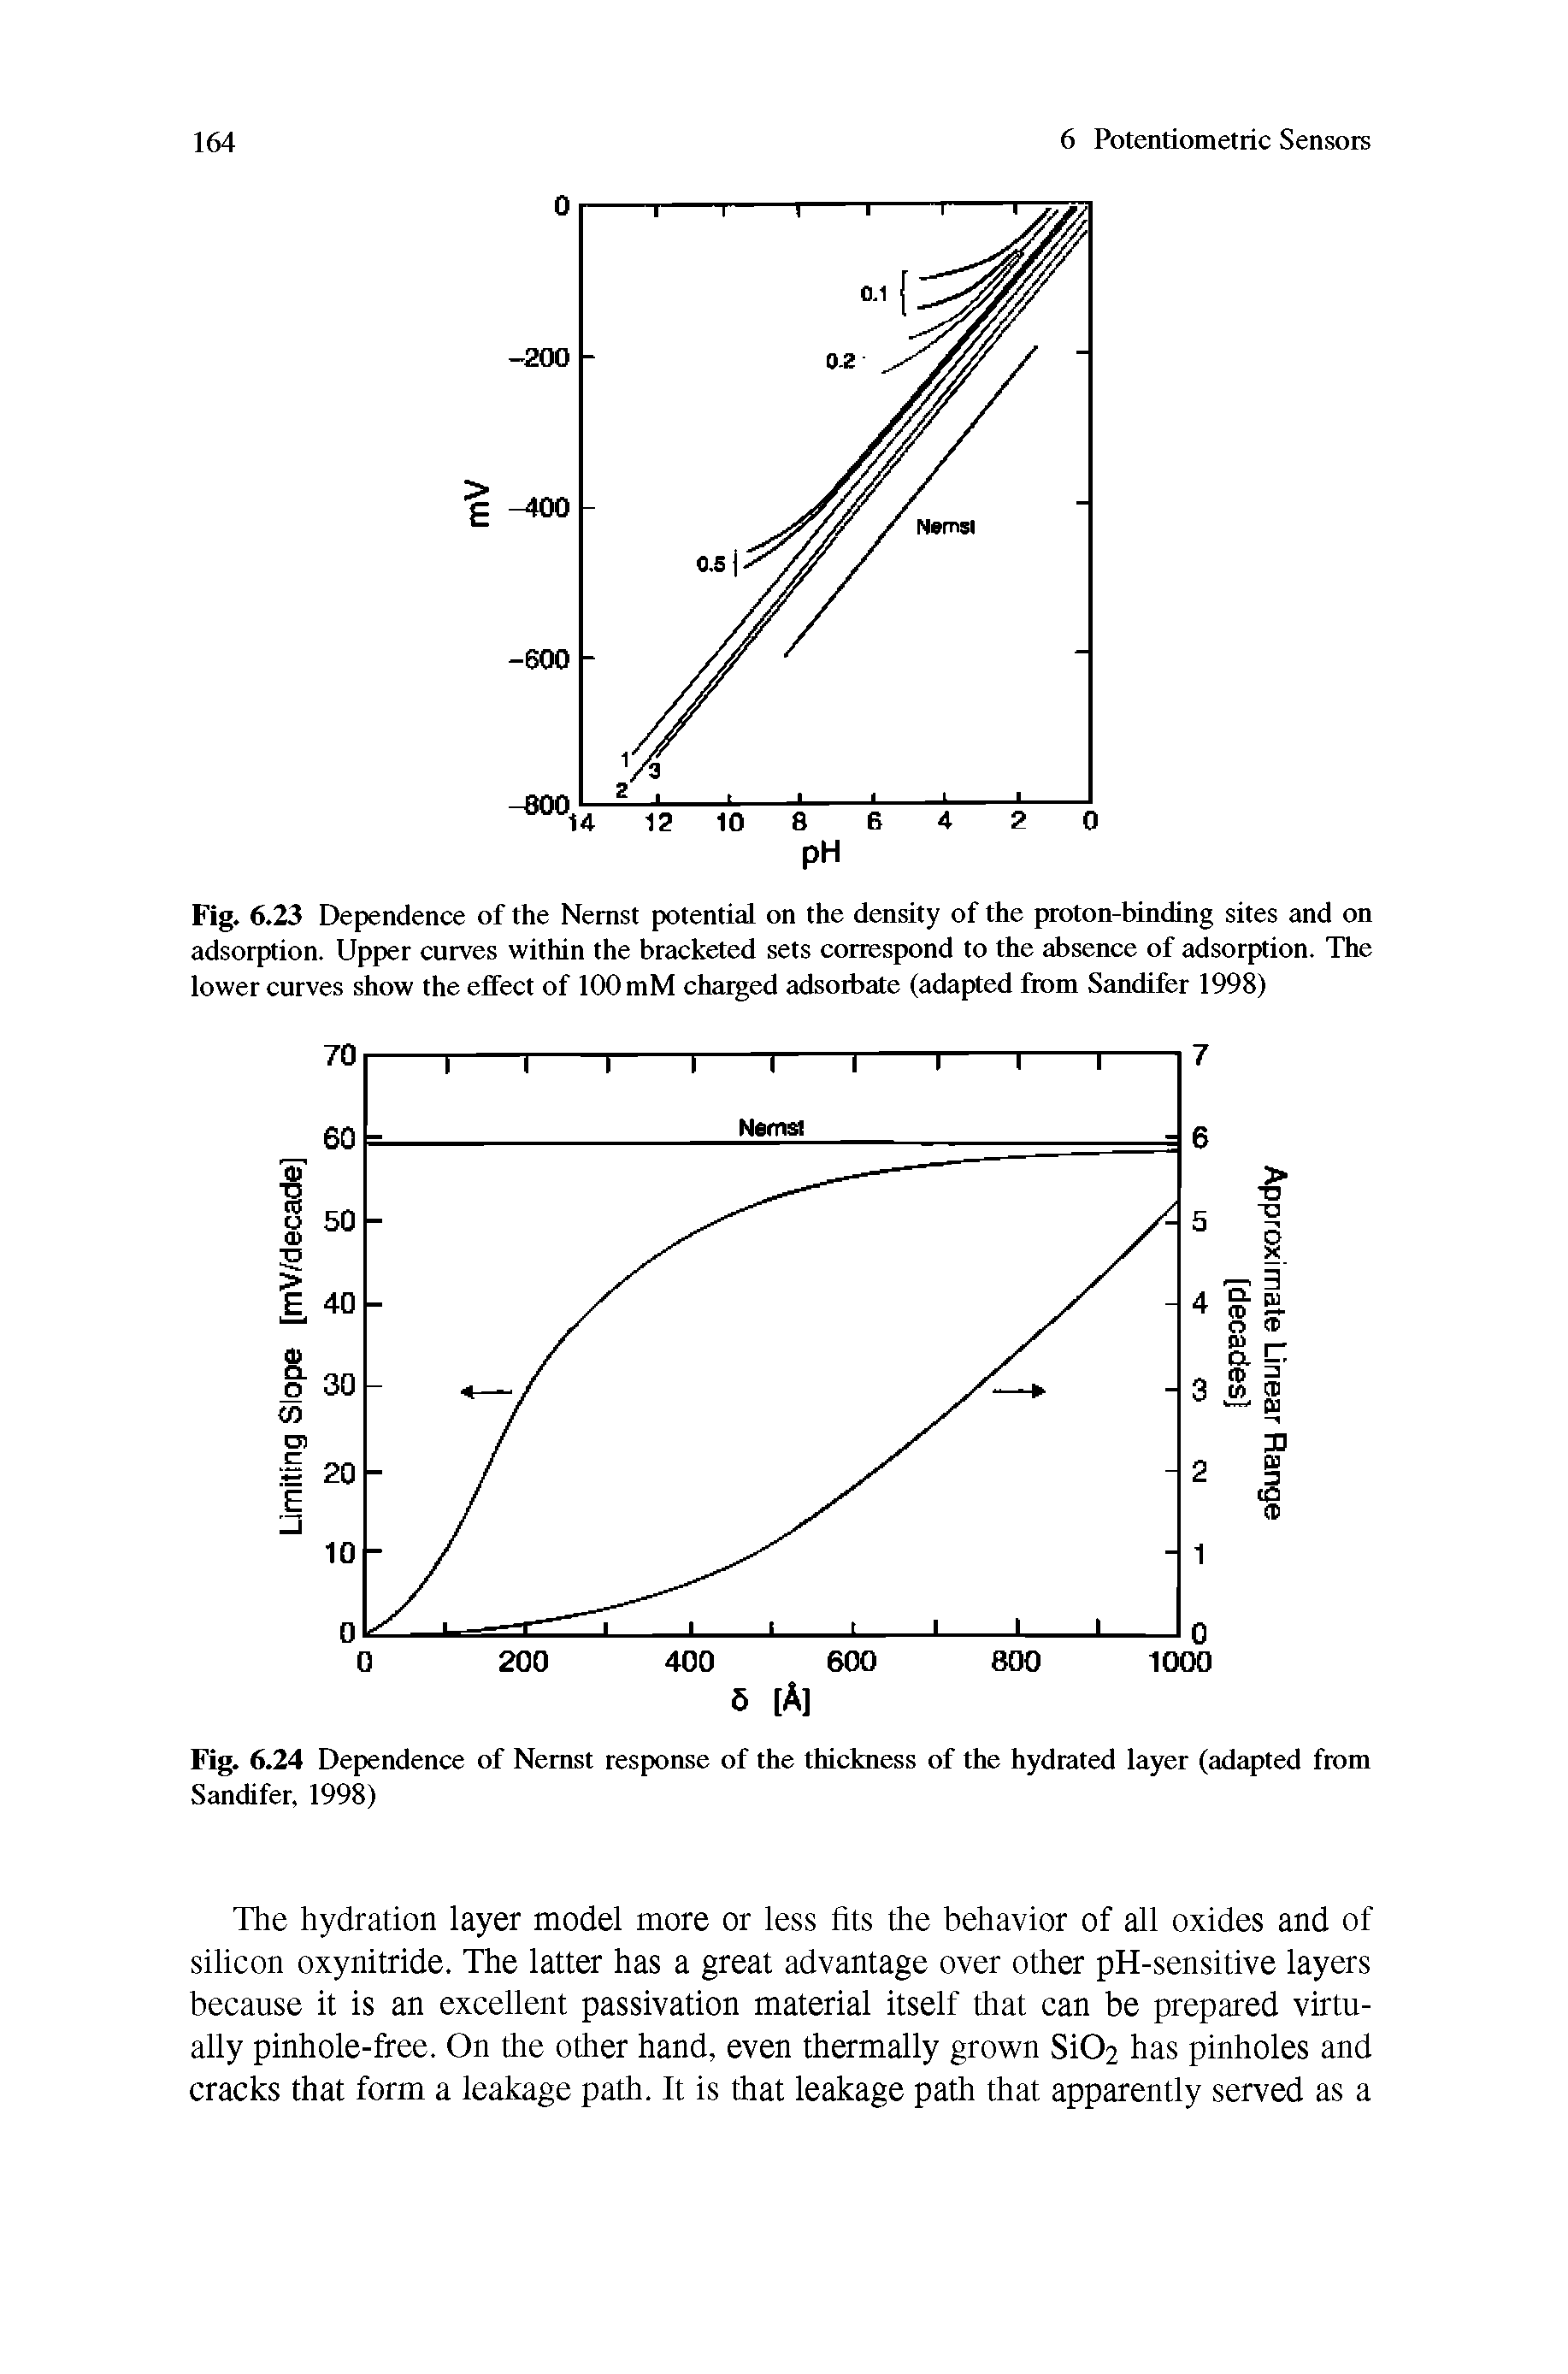 Fig. 6.24 Dependence of Nemst response of the thickness of the hydrated layer (adapted from Sandifer, 1998)...